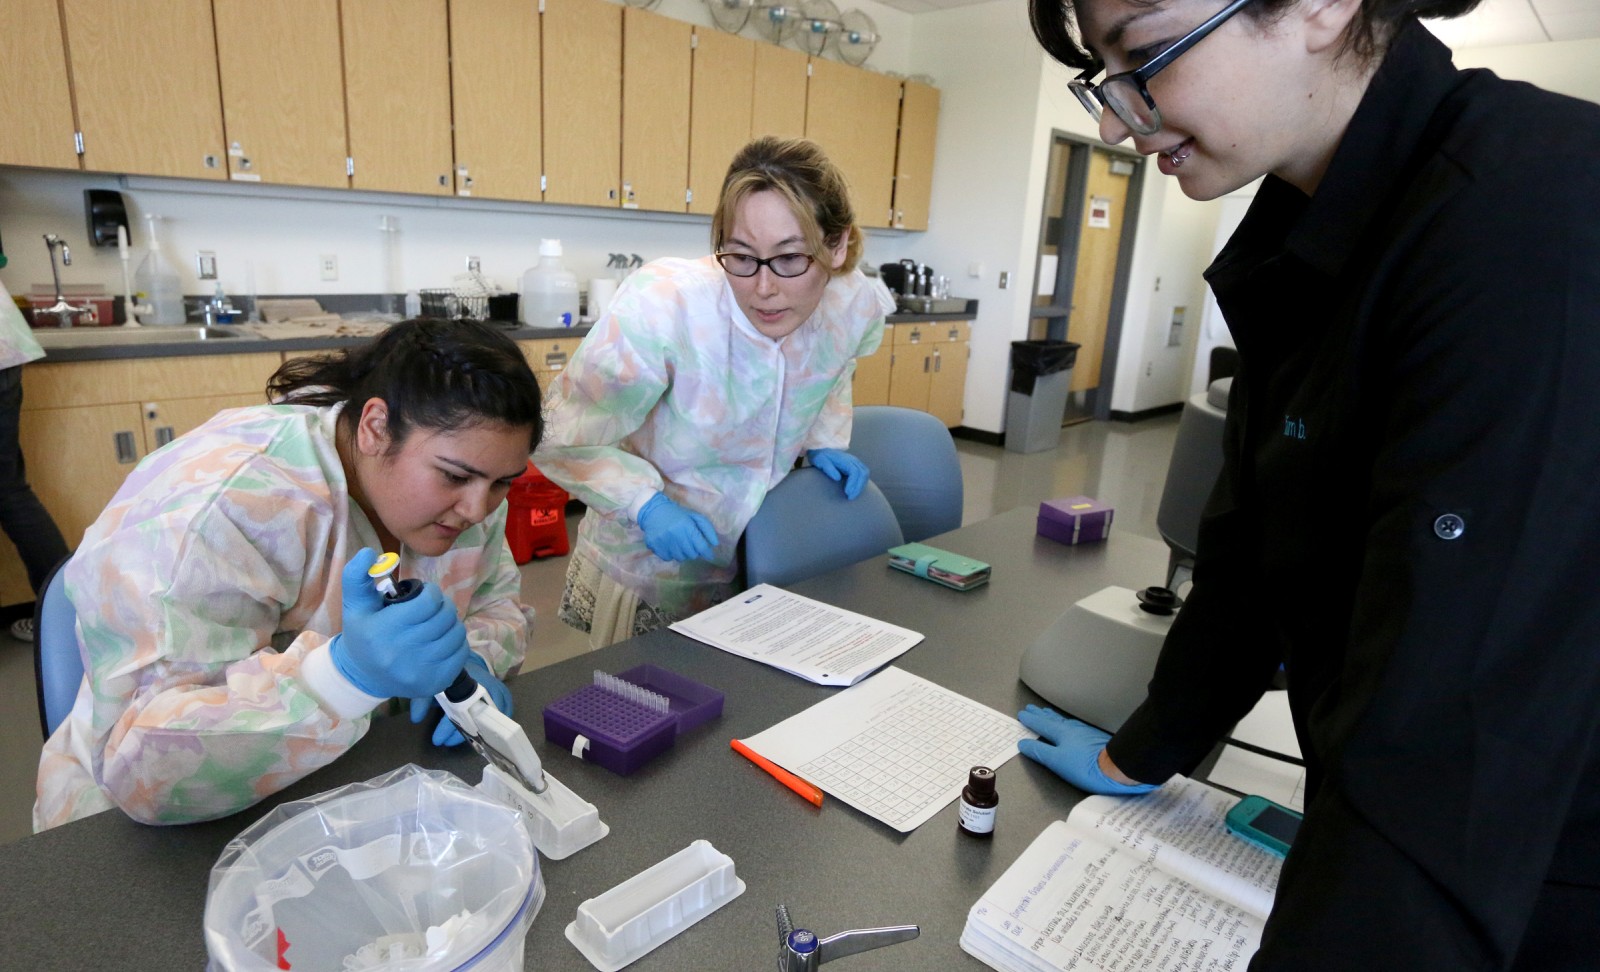 INBRE scholars work on a research project at the College of Western Idaho on May 24, 2018.